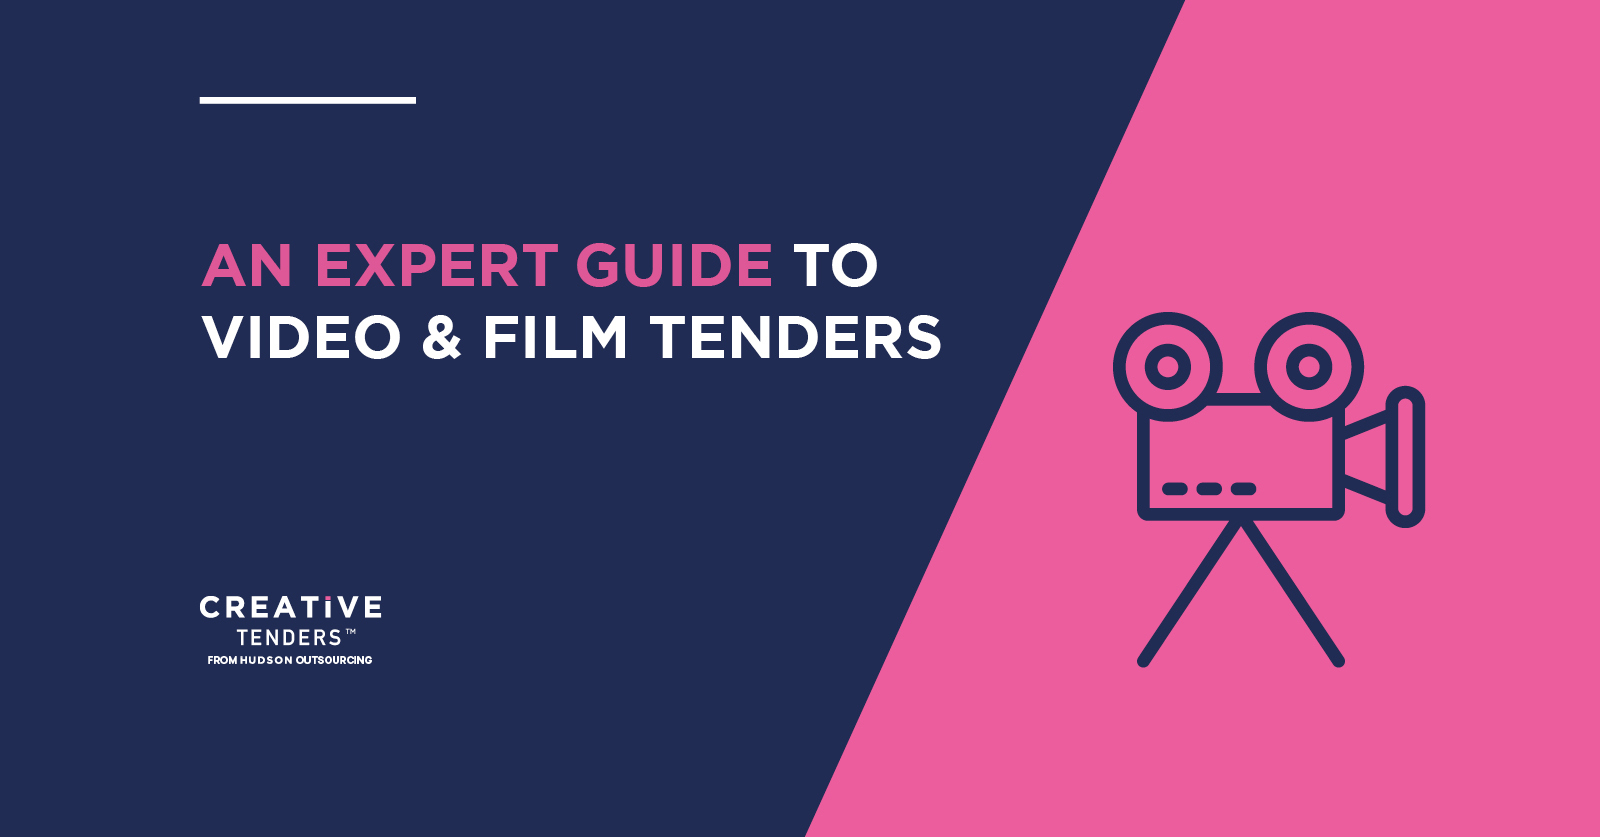 What is Required for a Video and Film Tender?